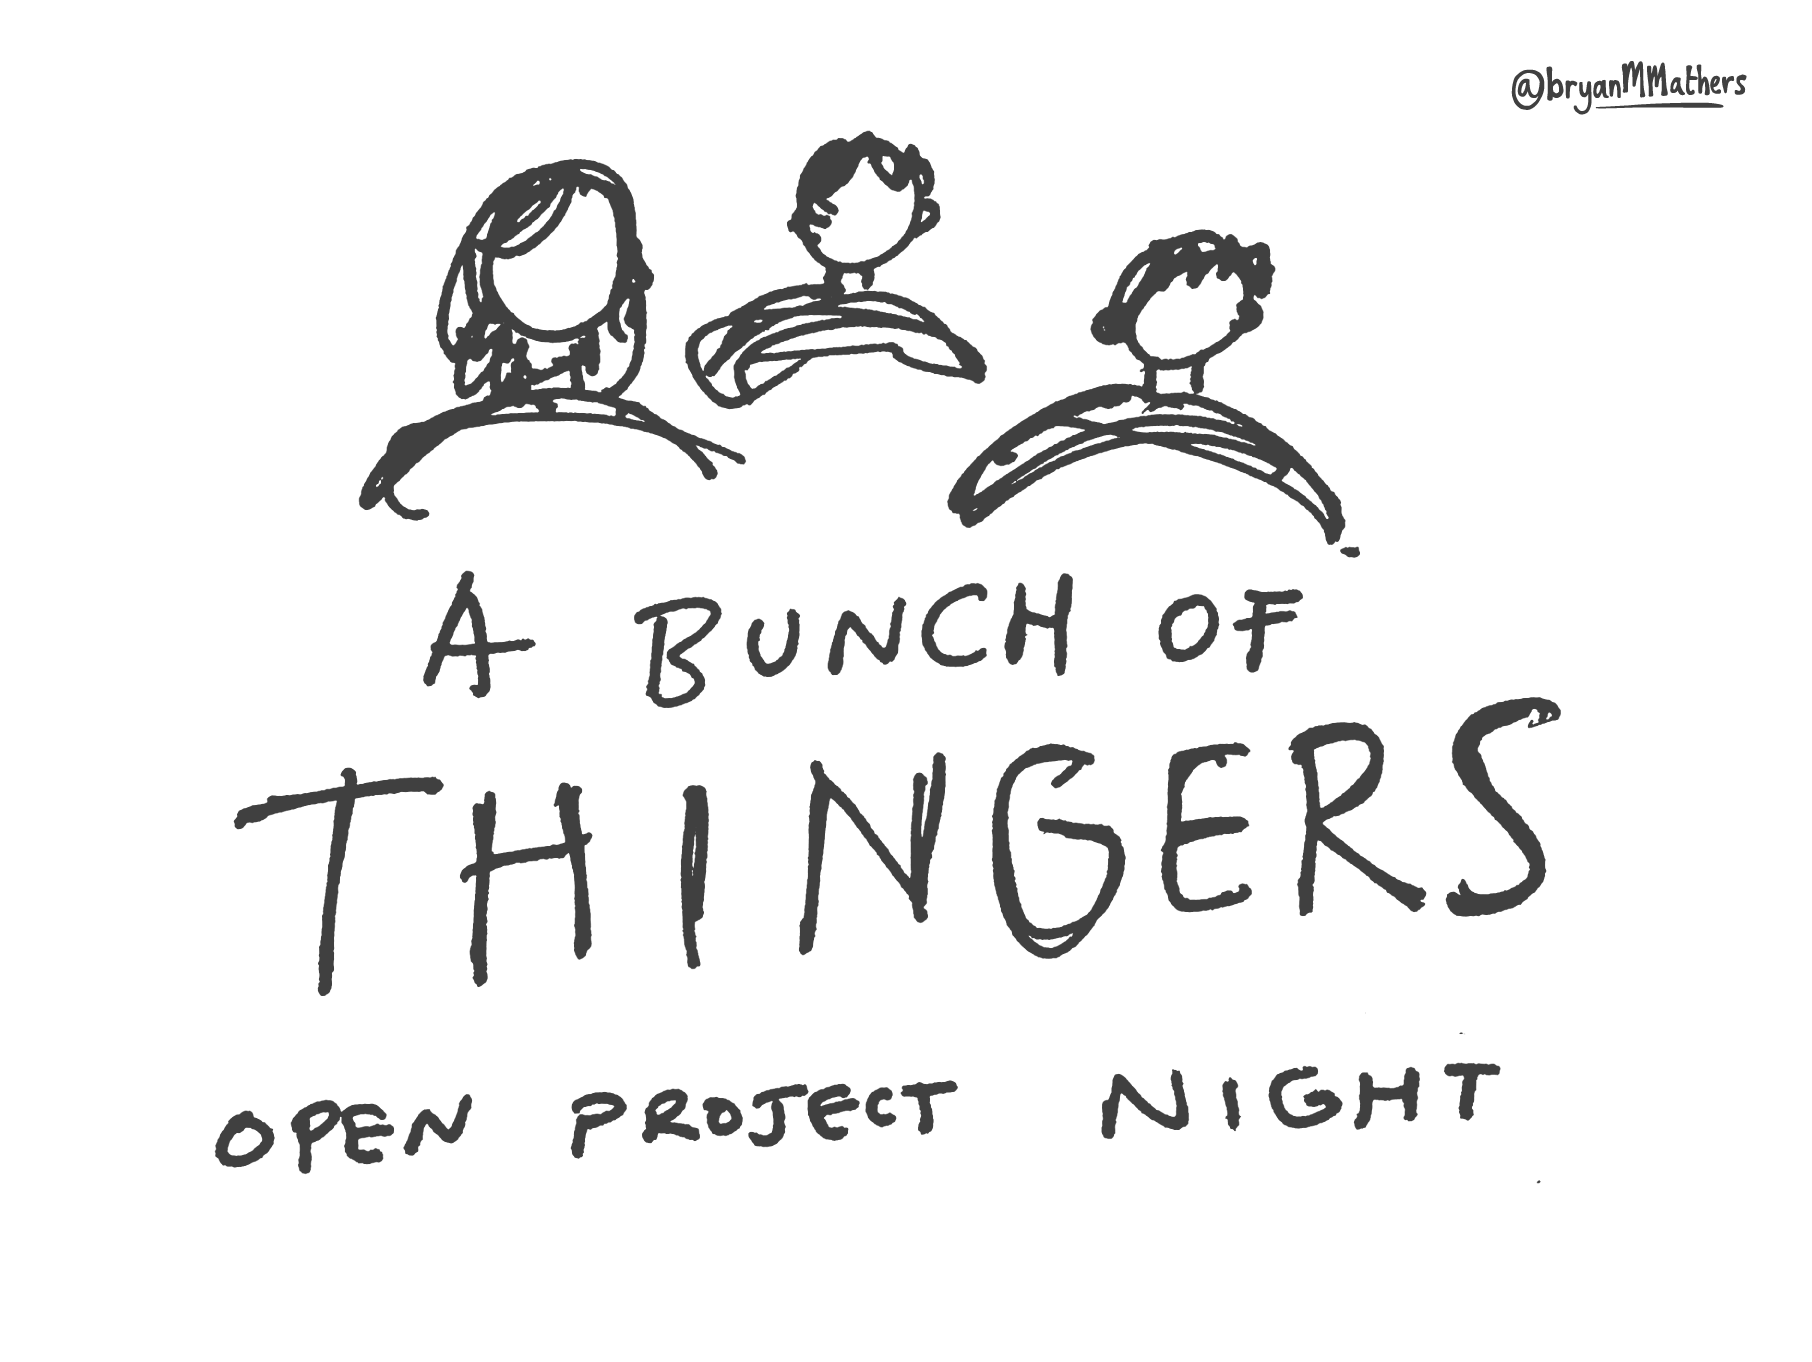 Open Project Night